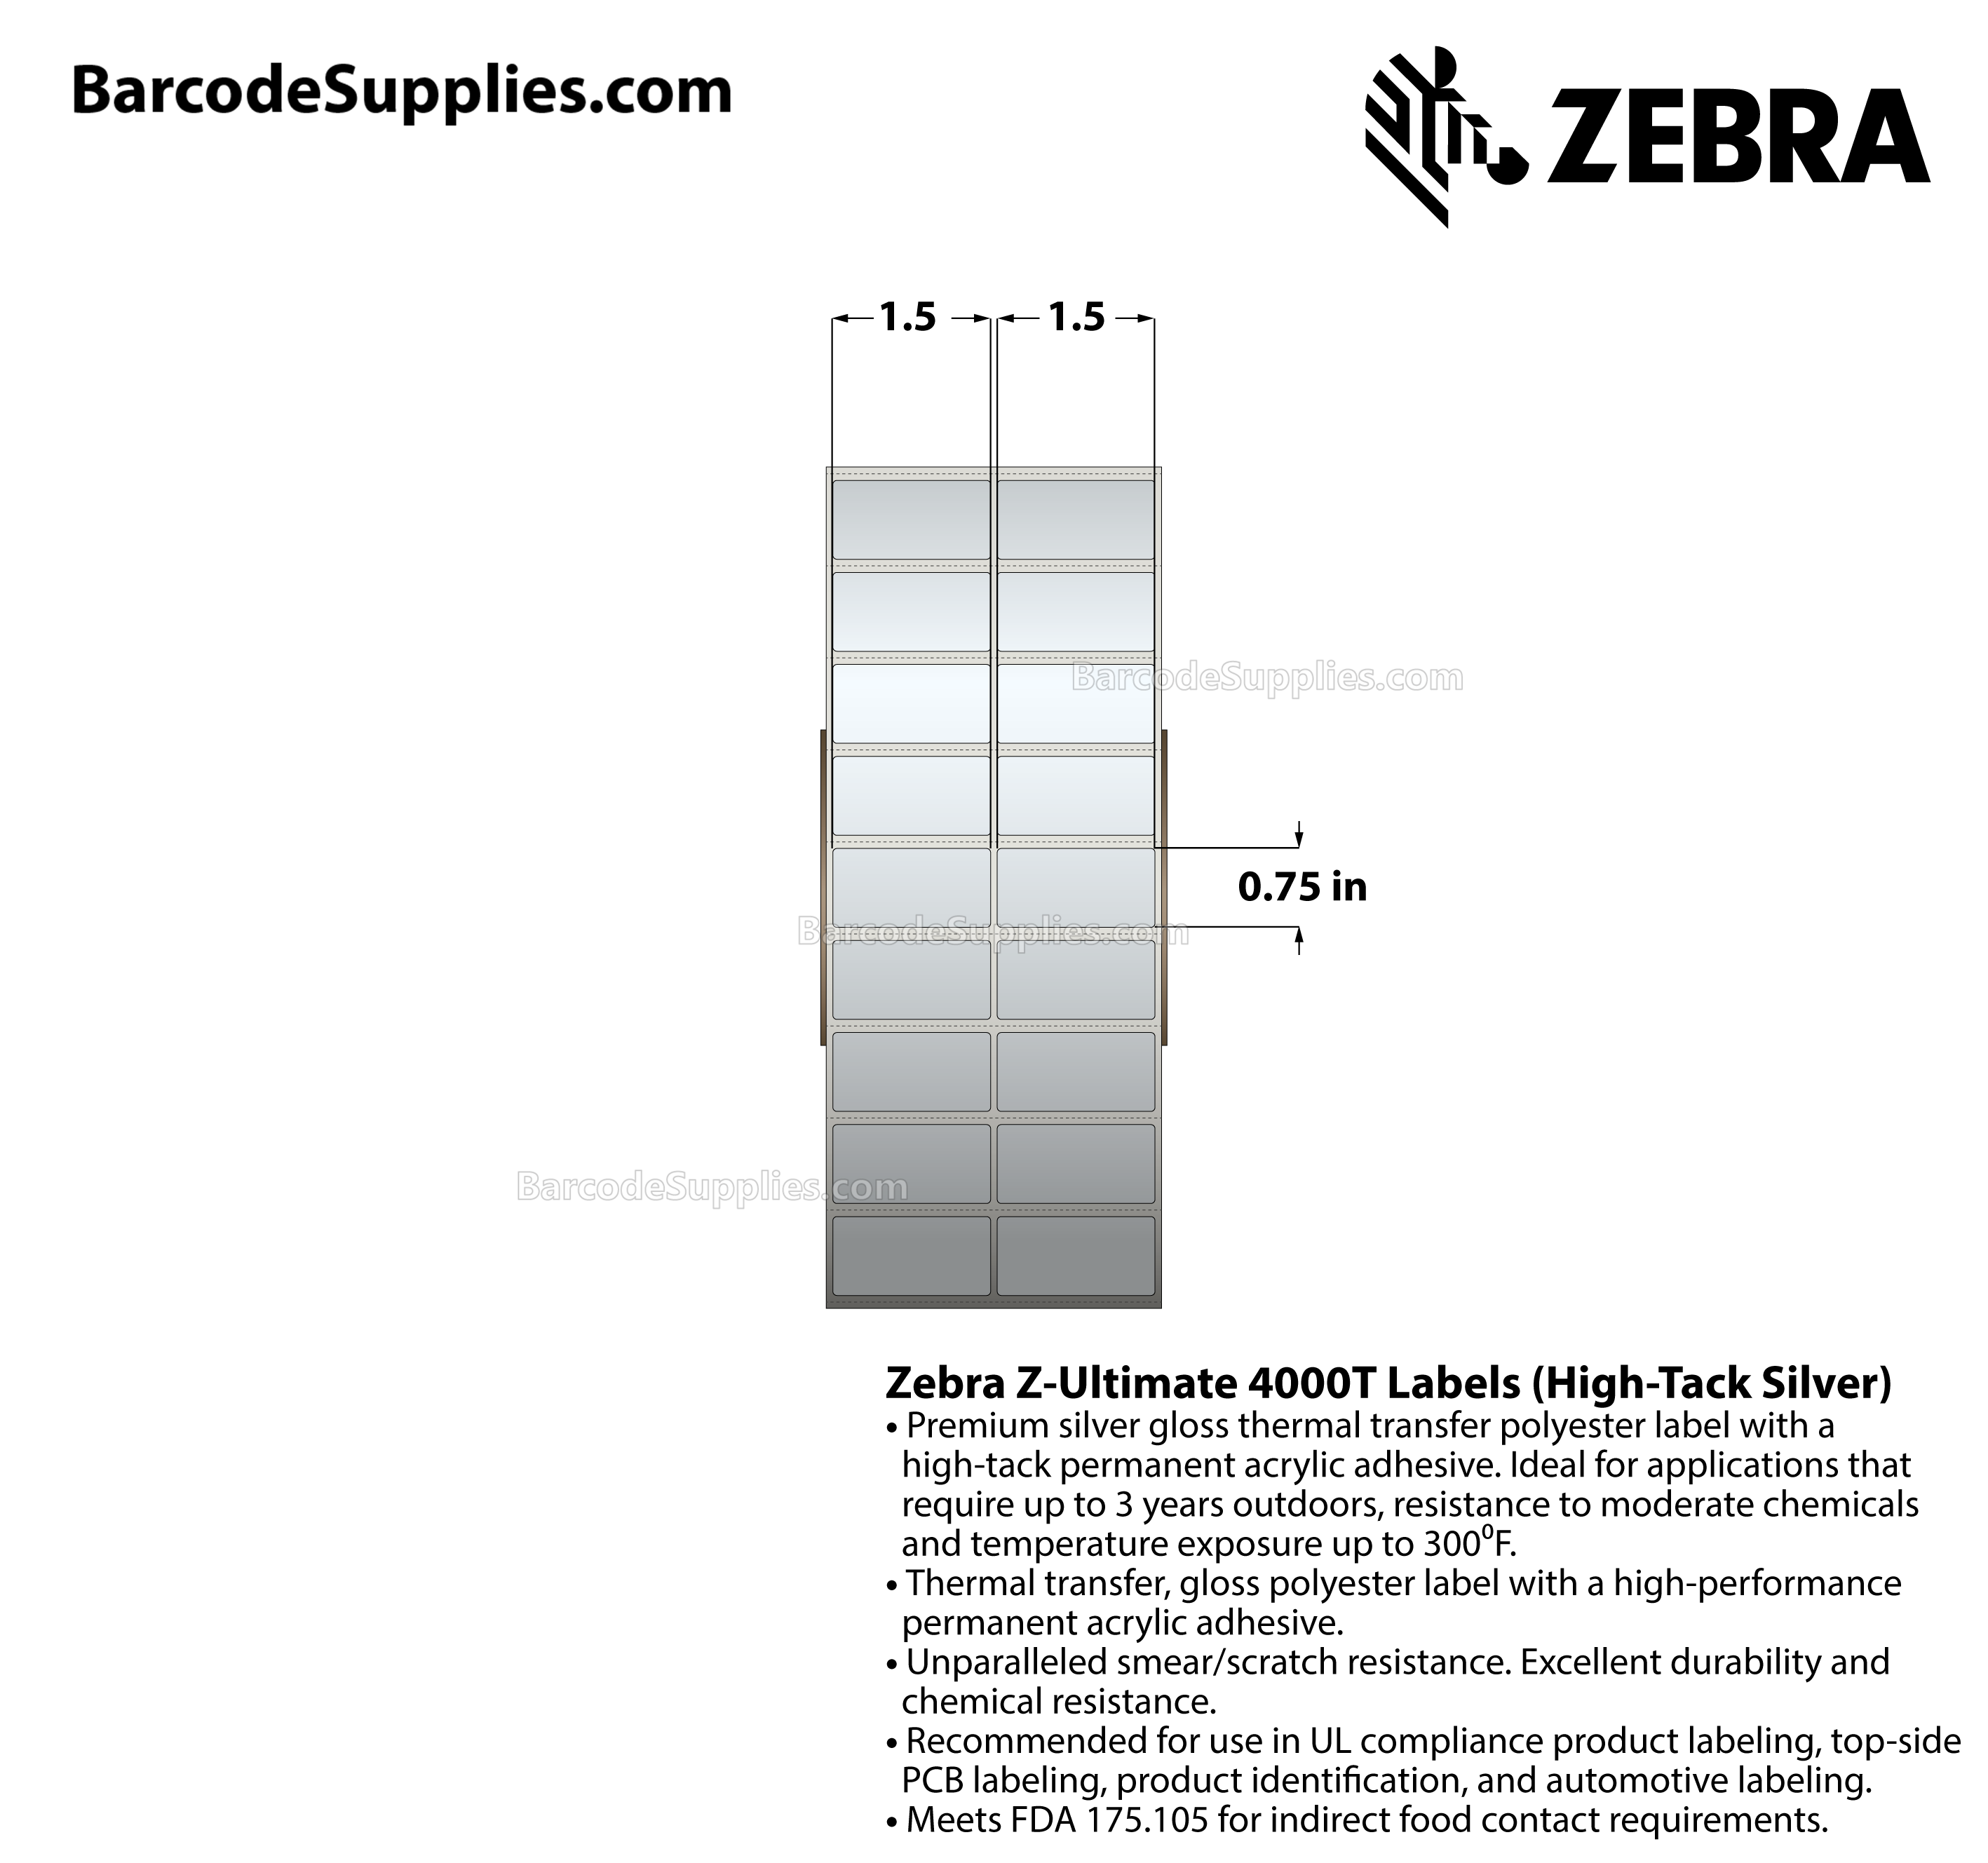 1.5 x 0.75 Thermal Transfer Silver Z-Ultimate 4000T High-Tack Silver (2-Across) Labels With High-tack Adhesive - Perforated - 10000 Labels Per Roll - Carton Of 1 Rolls - 10000 Labels Total - MPN: 10023350